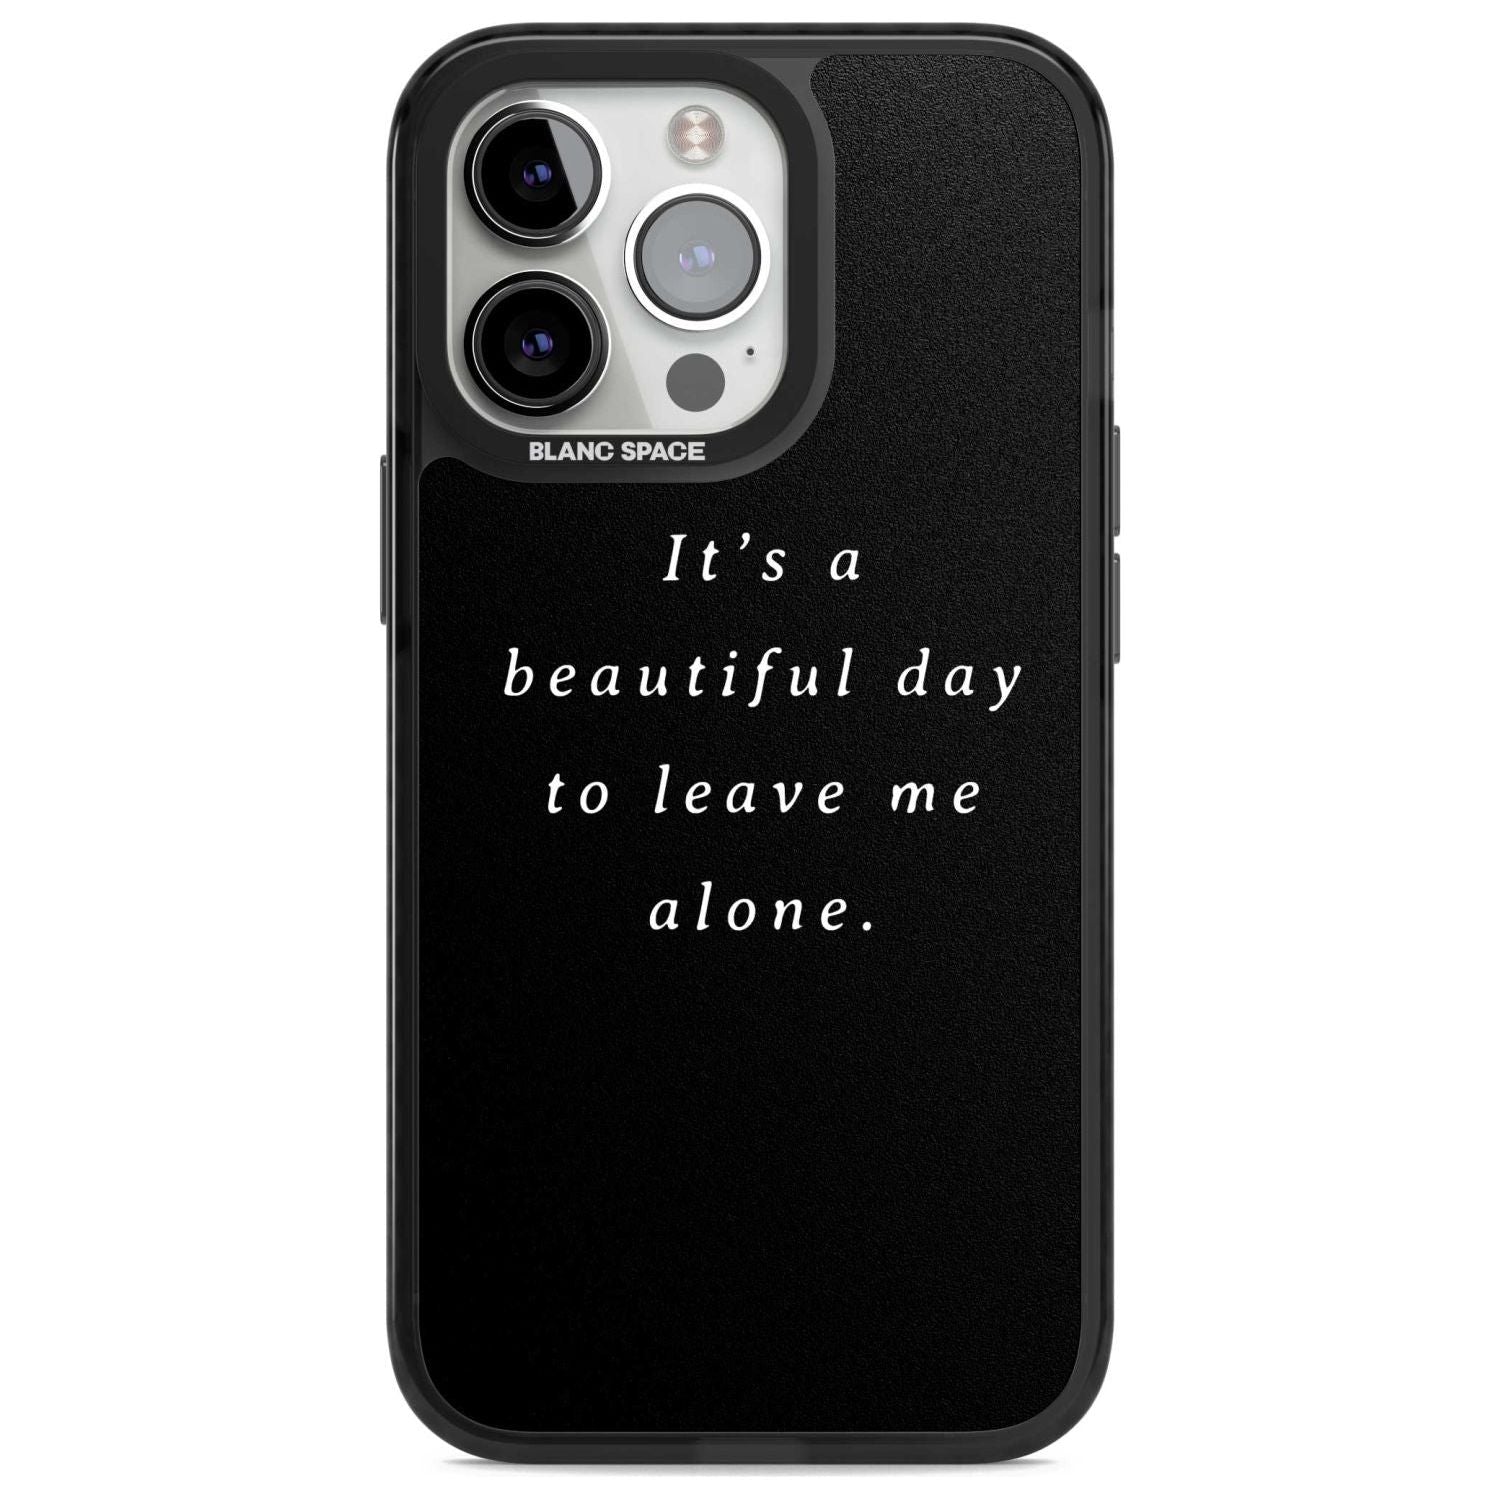 Leave me alone Phone Case iPhone 15 Pro Max / Magsafe Black Impact Case,iPhone 15 Pro / Magsafe Black Impact Case,iPhone 14 Pro Max / Magsafe Black Impact Case,iPhone 14 Pro / Magsafe Black Impact Case,iPhone 13 Pro / Magsafe Black Impact Case Blanc Space